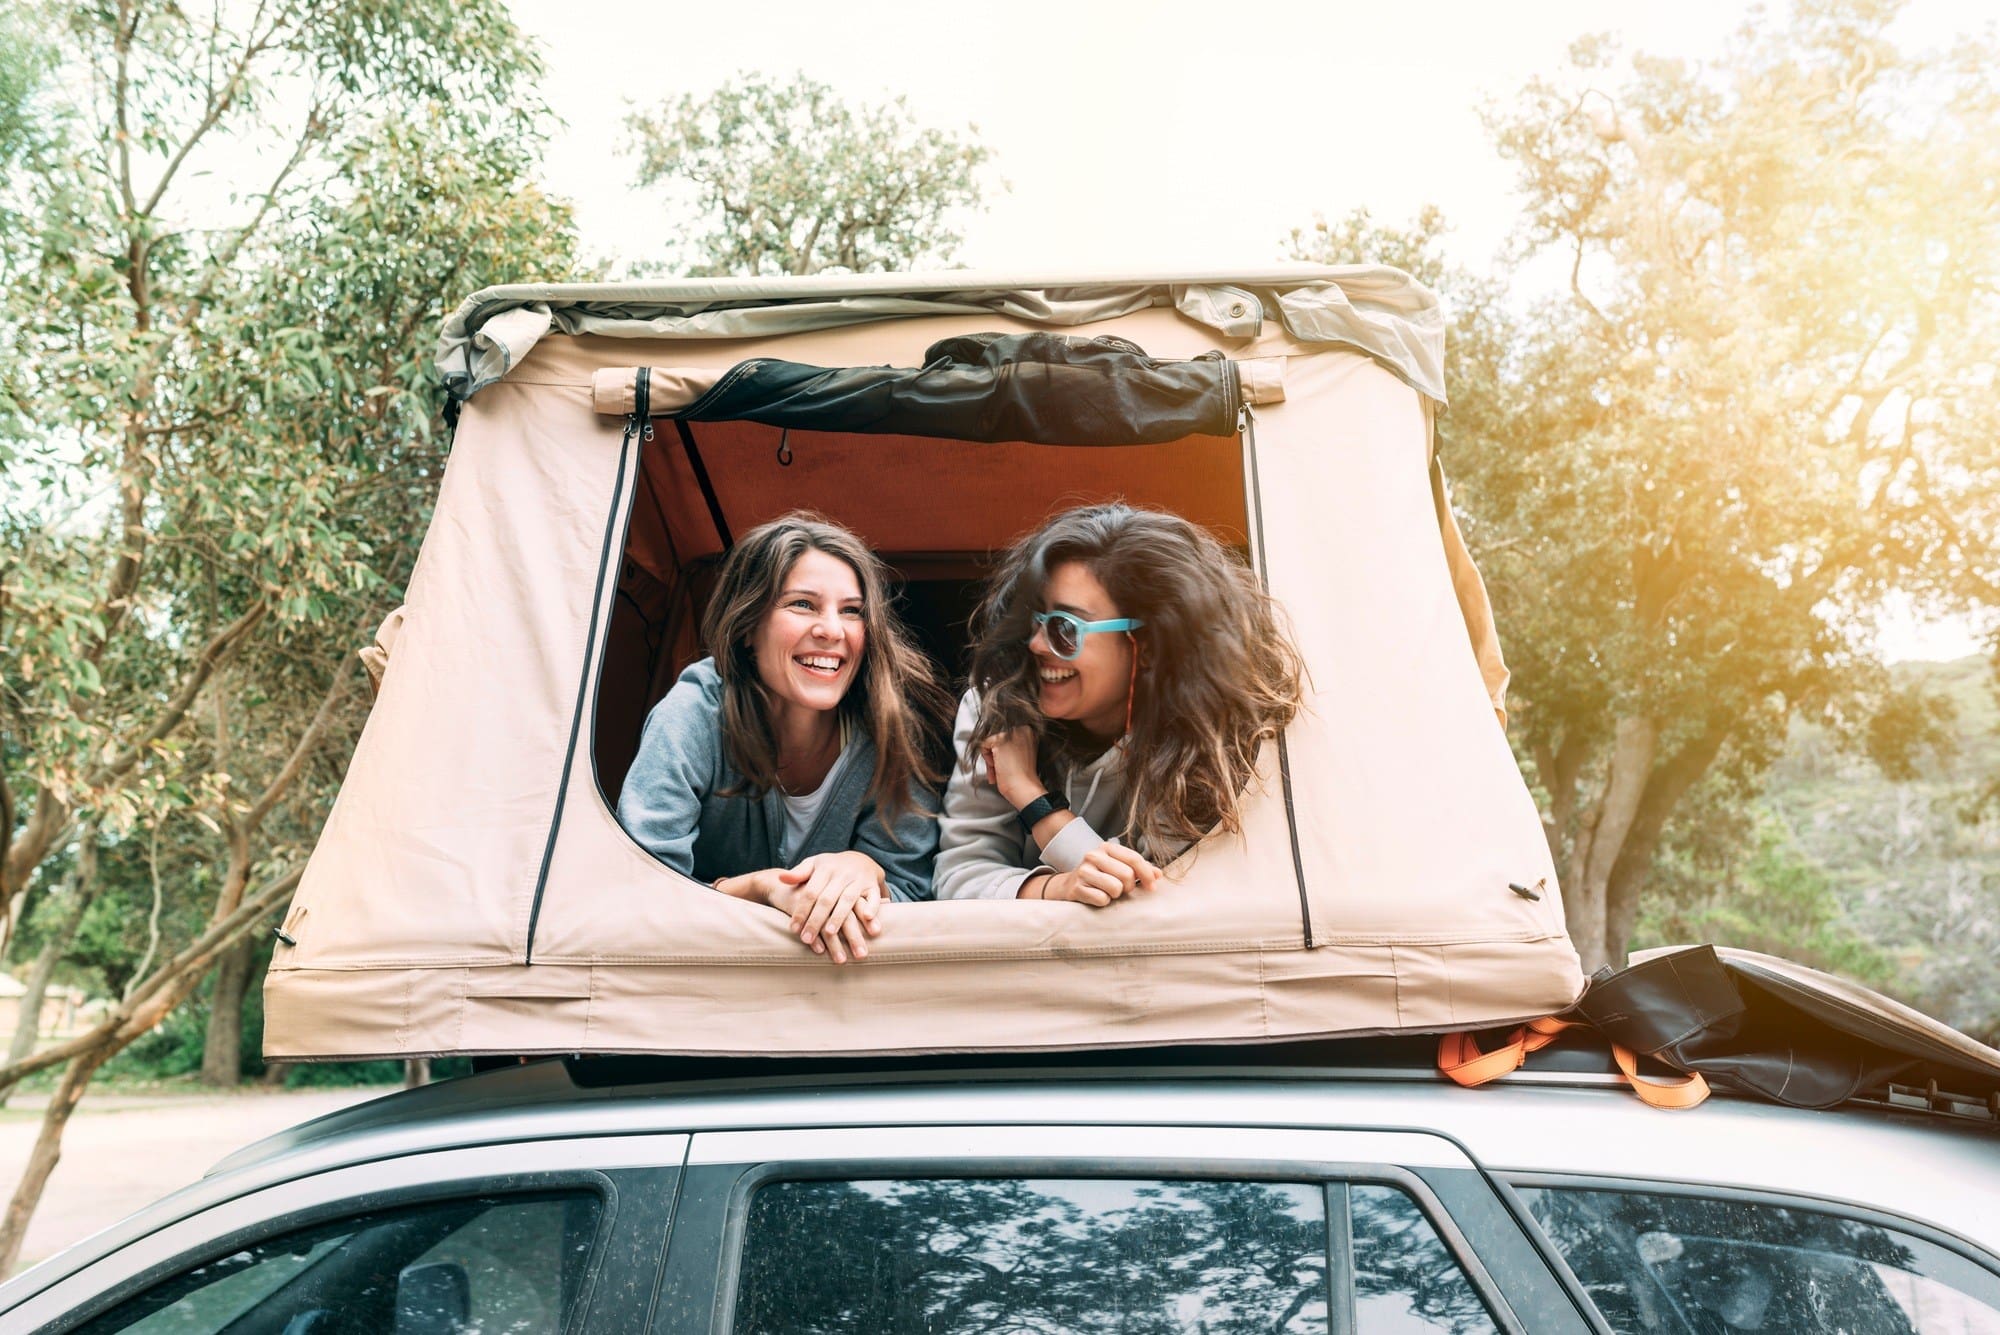 8 must have items for your first camping trip